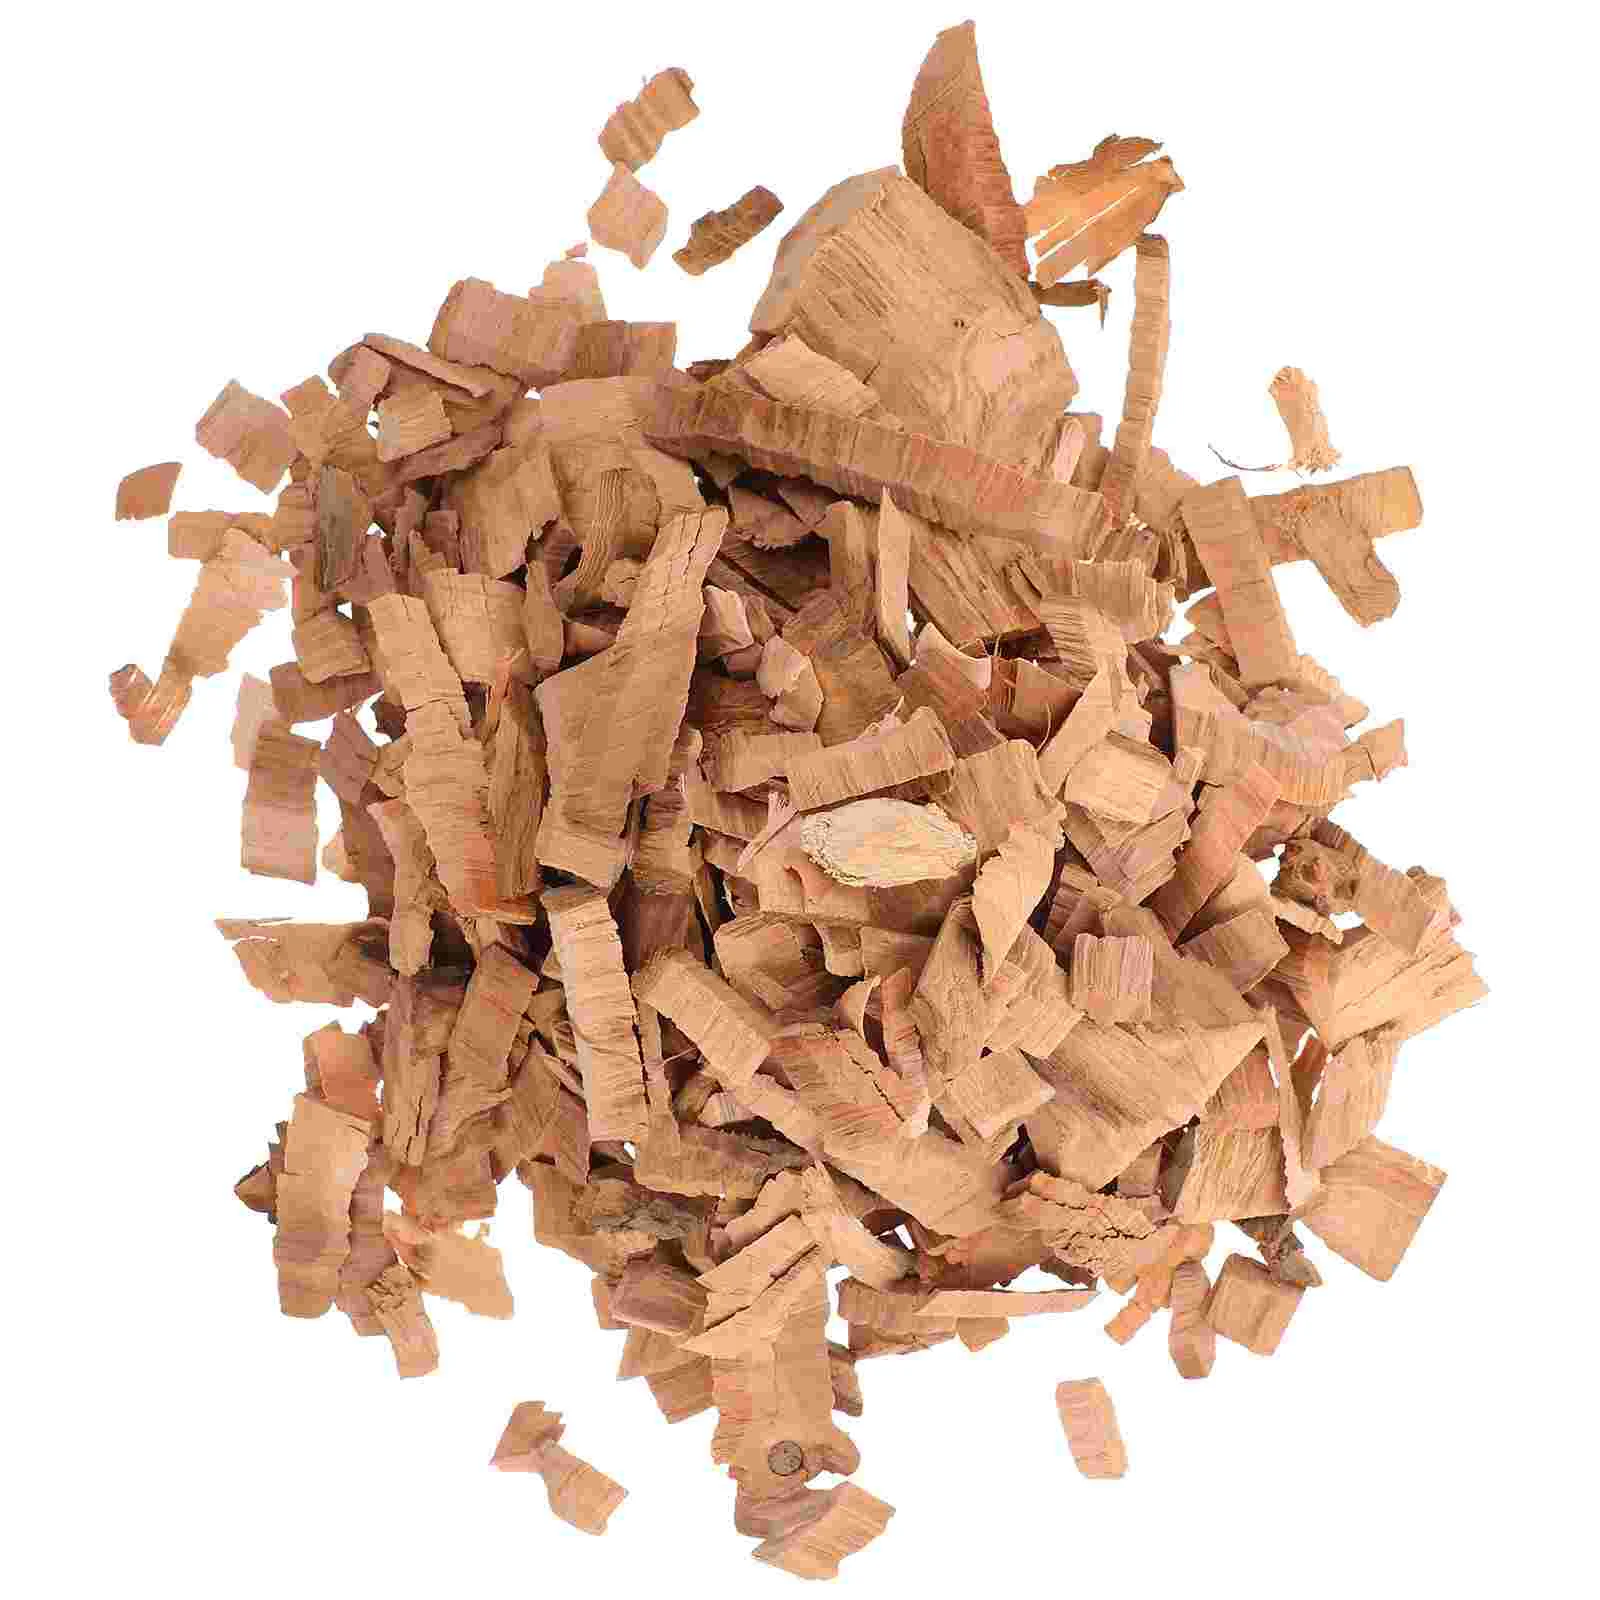 

Wood Chips Chunks Smoker Apple Smoking Bbq Barbecue Cookingsawdust Camping Products Pecanoak Shavings Accessories Hickory